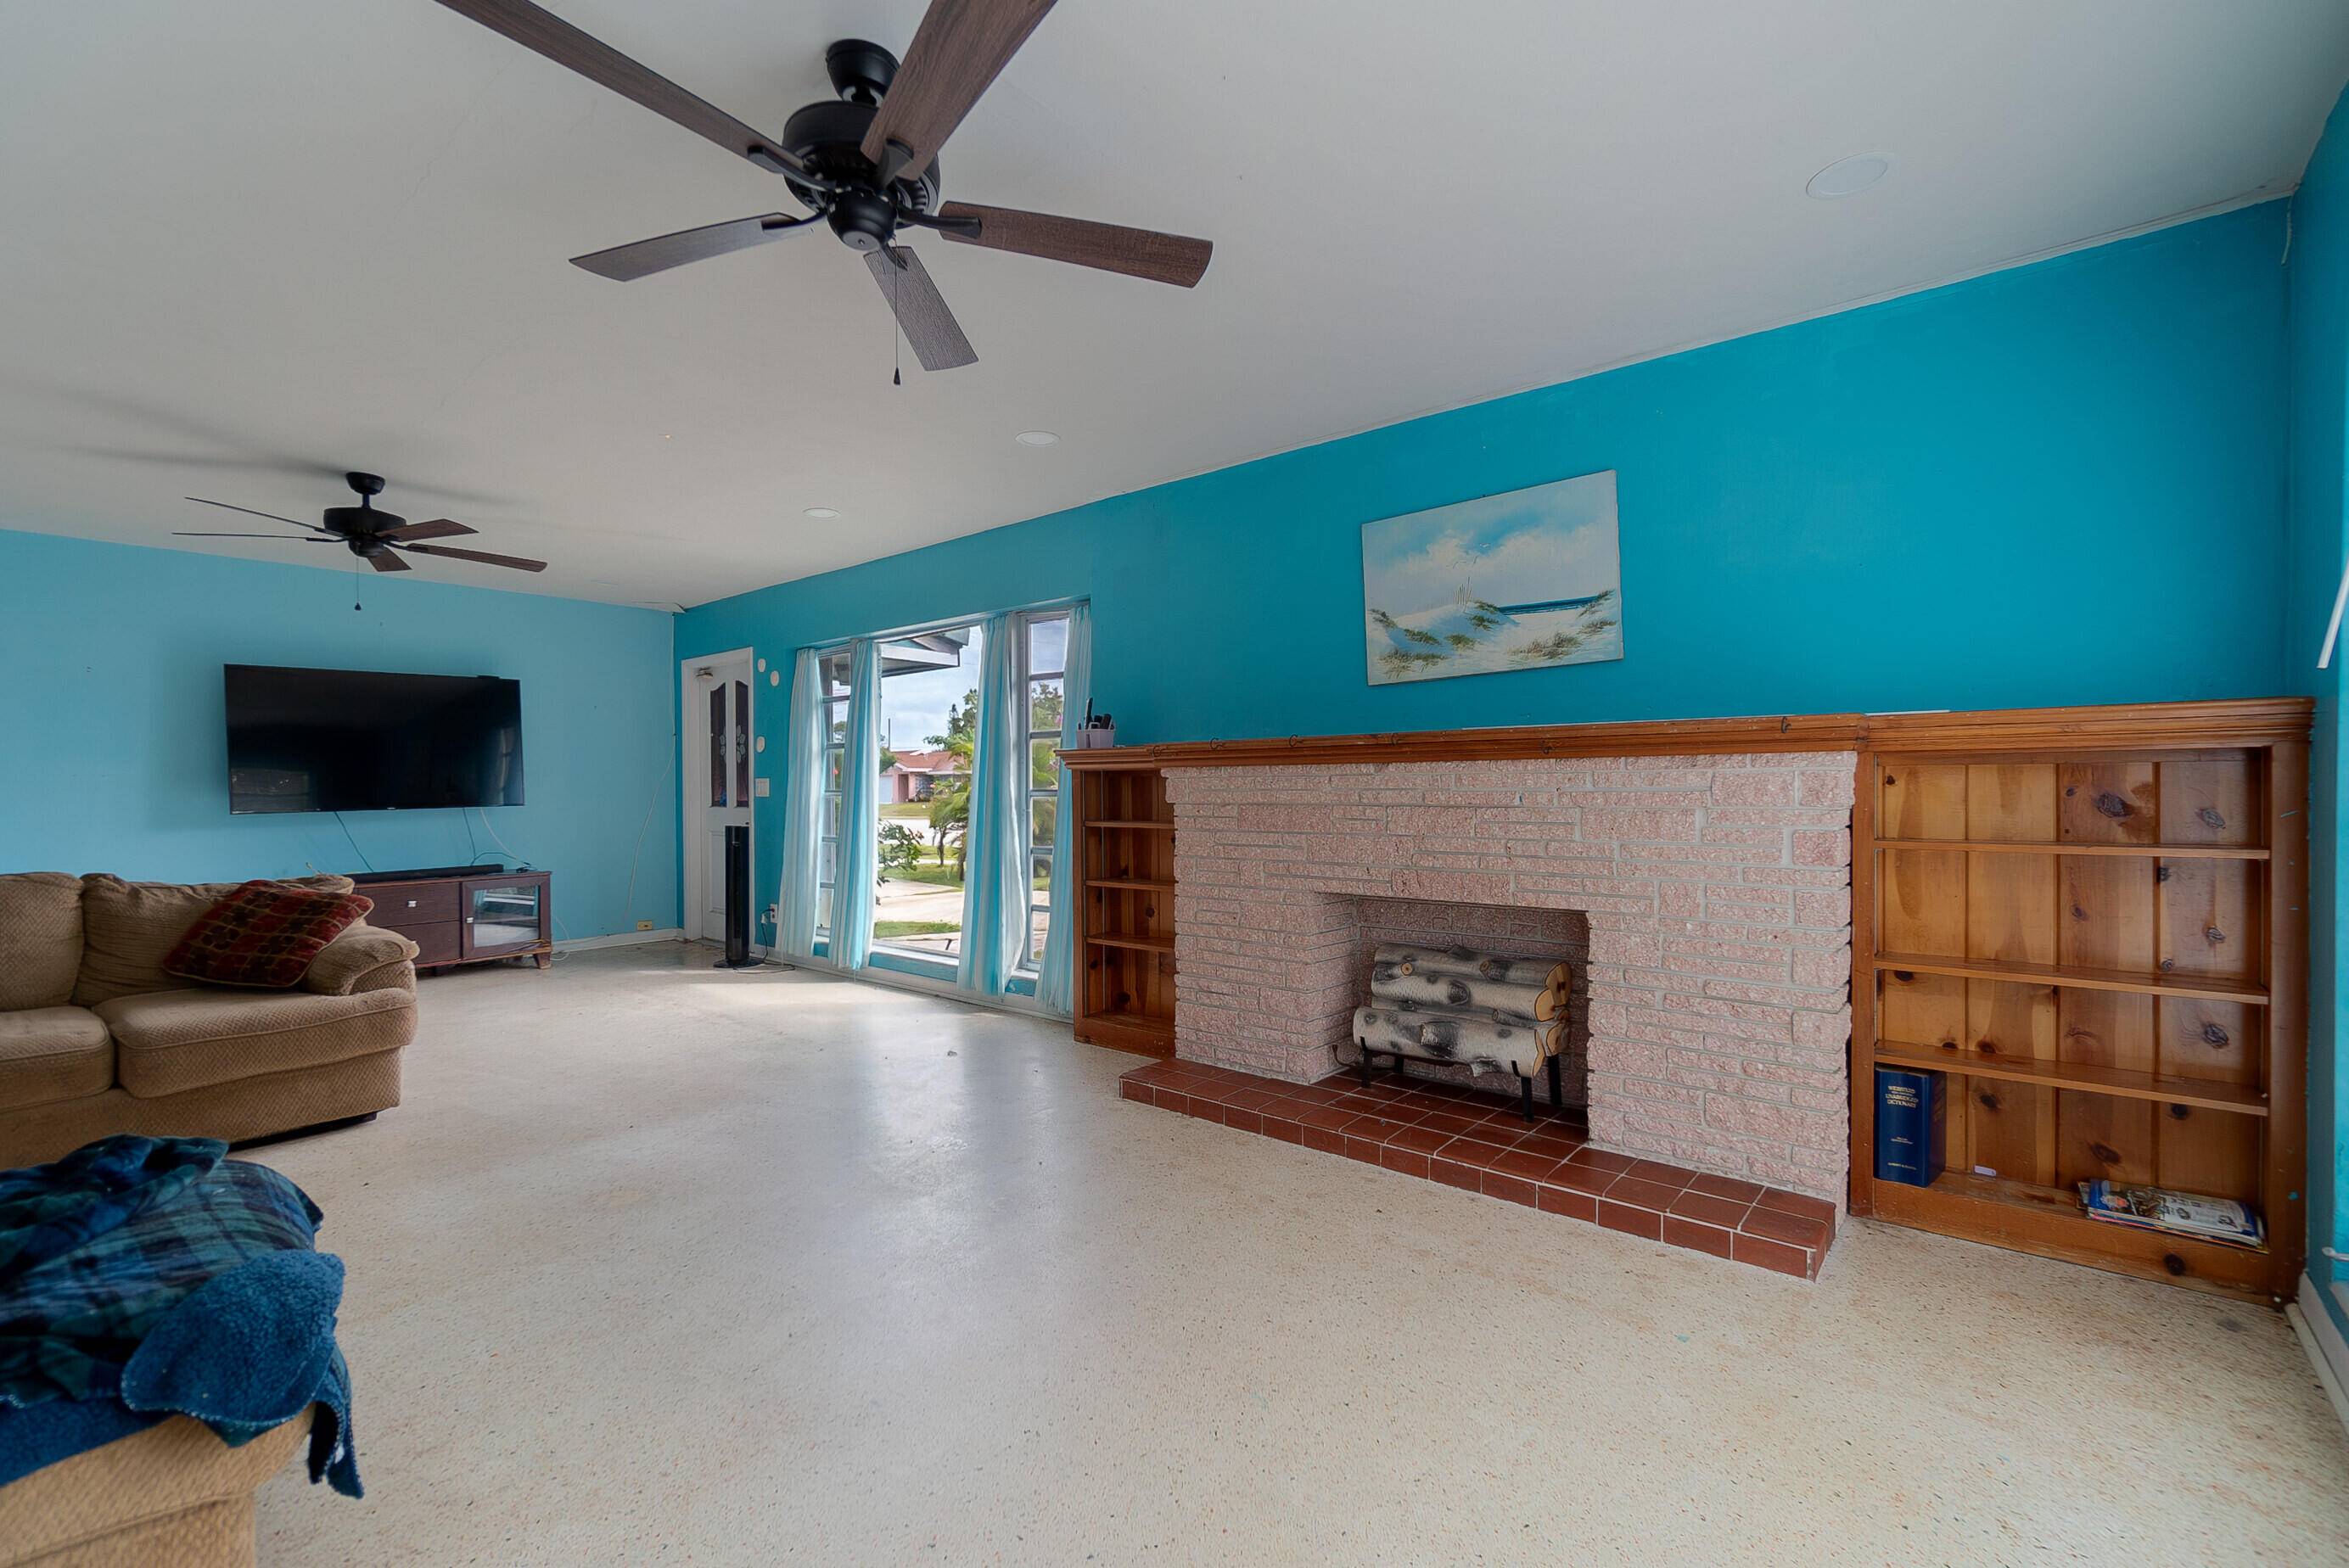 Nice large duplex property in Downtown Boynton Beach, Florida just steps to the new library City Hall and minutes to beautiful beaches and Marina.